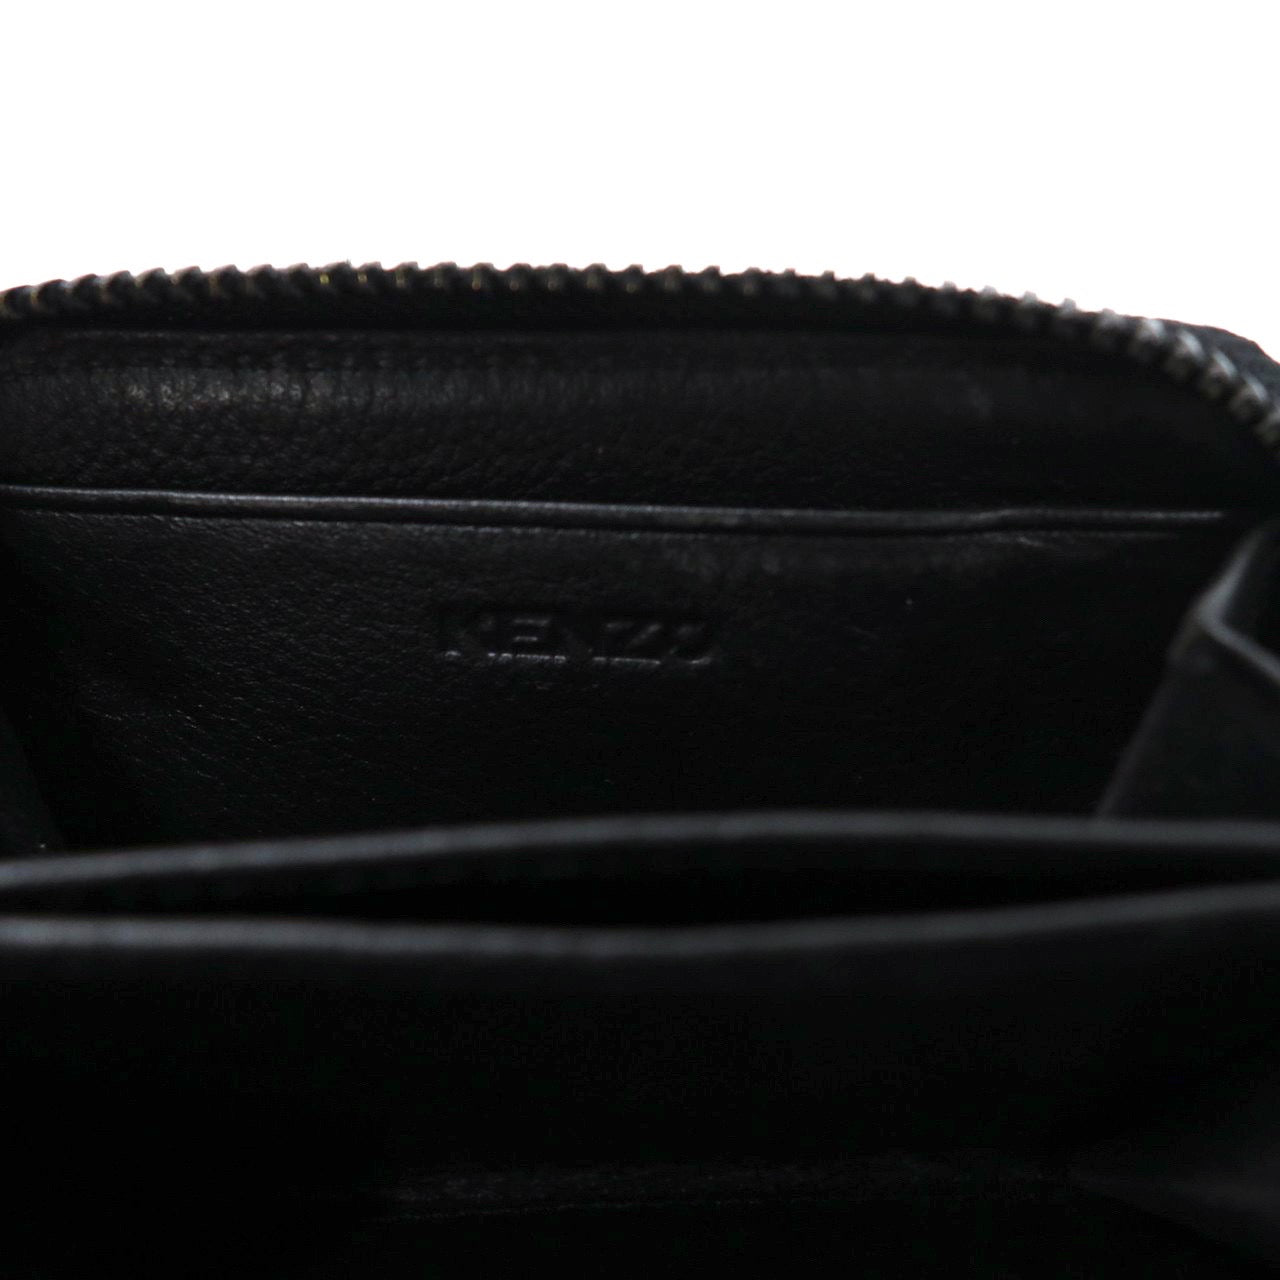 KENZO COIN WALLET Coin purse black leather tiger logo embroidery